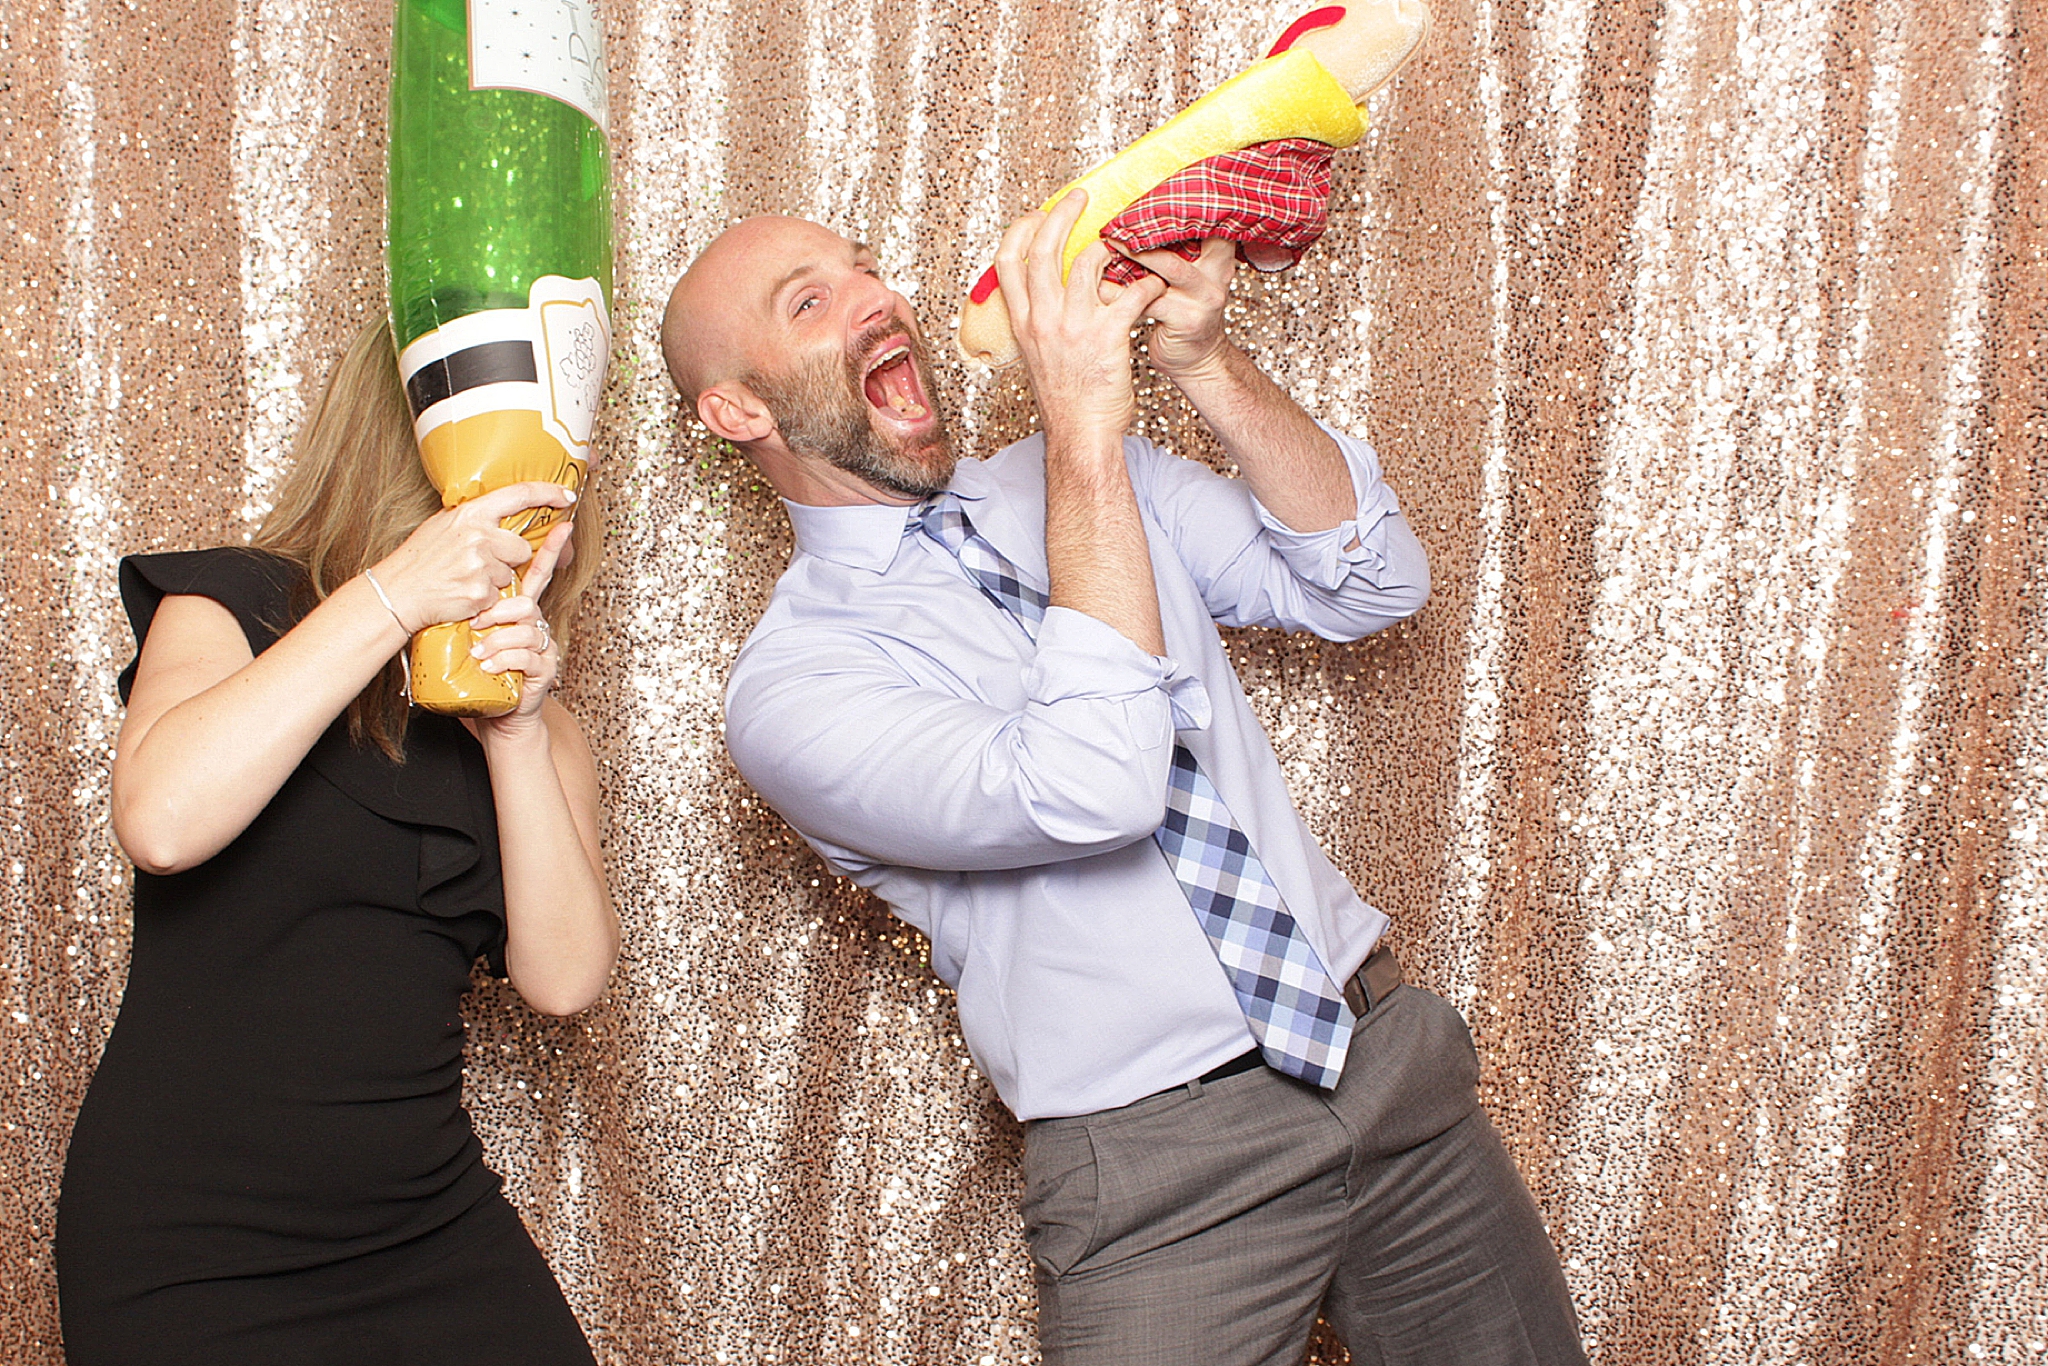 guests play with inflatable food in photo booth